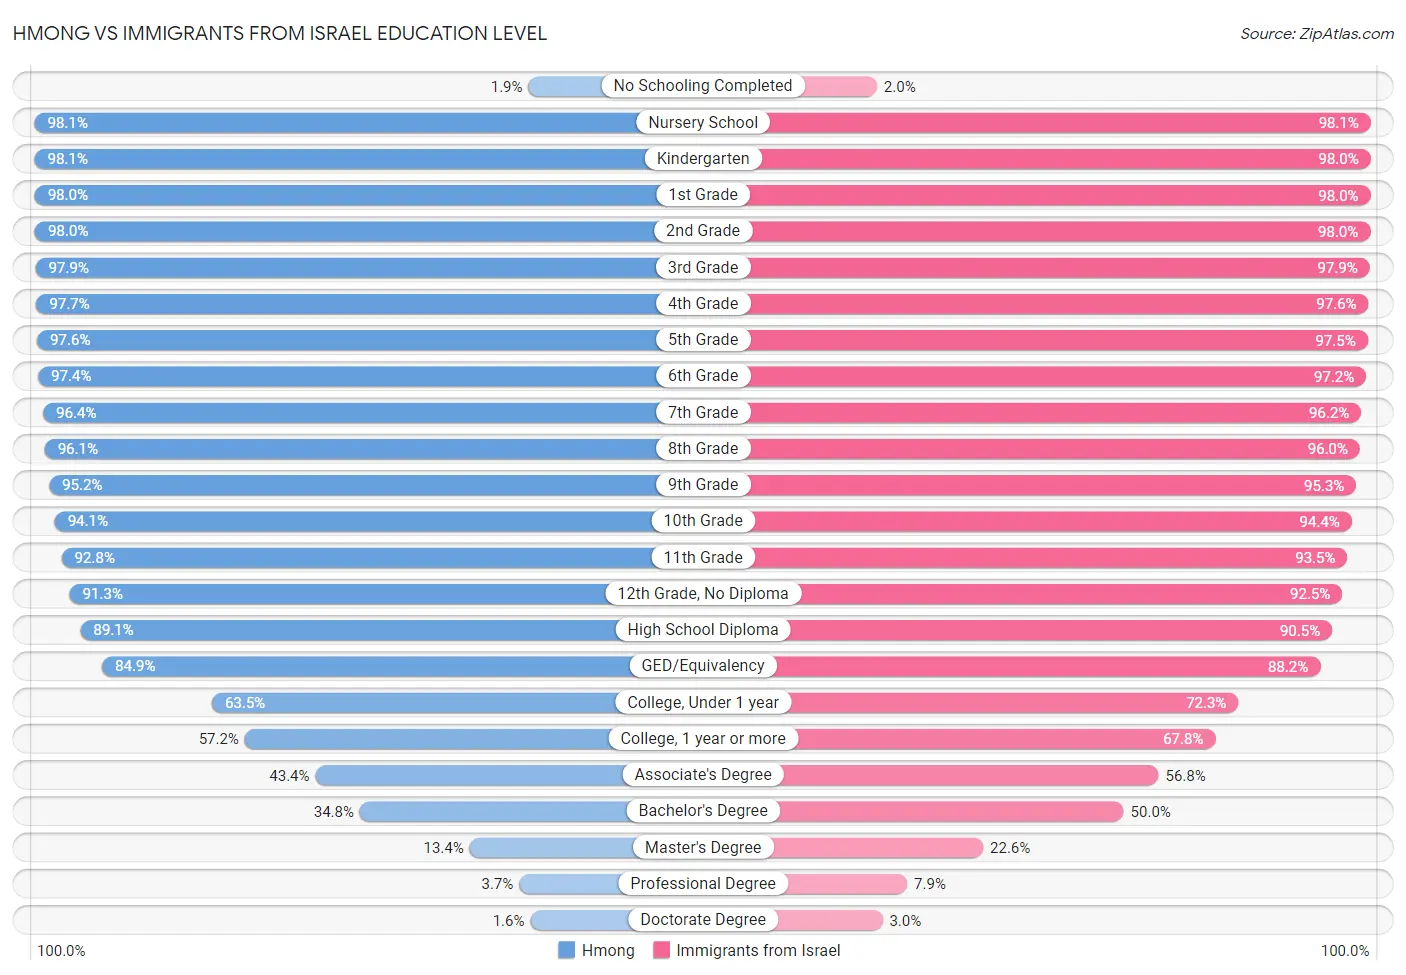 Hmong vs Immigrants from Israel Education Level